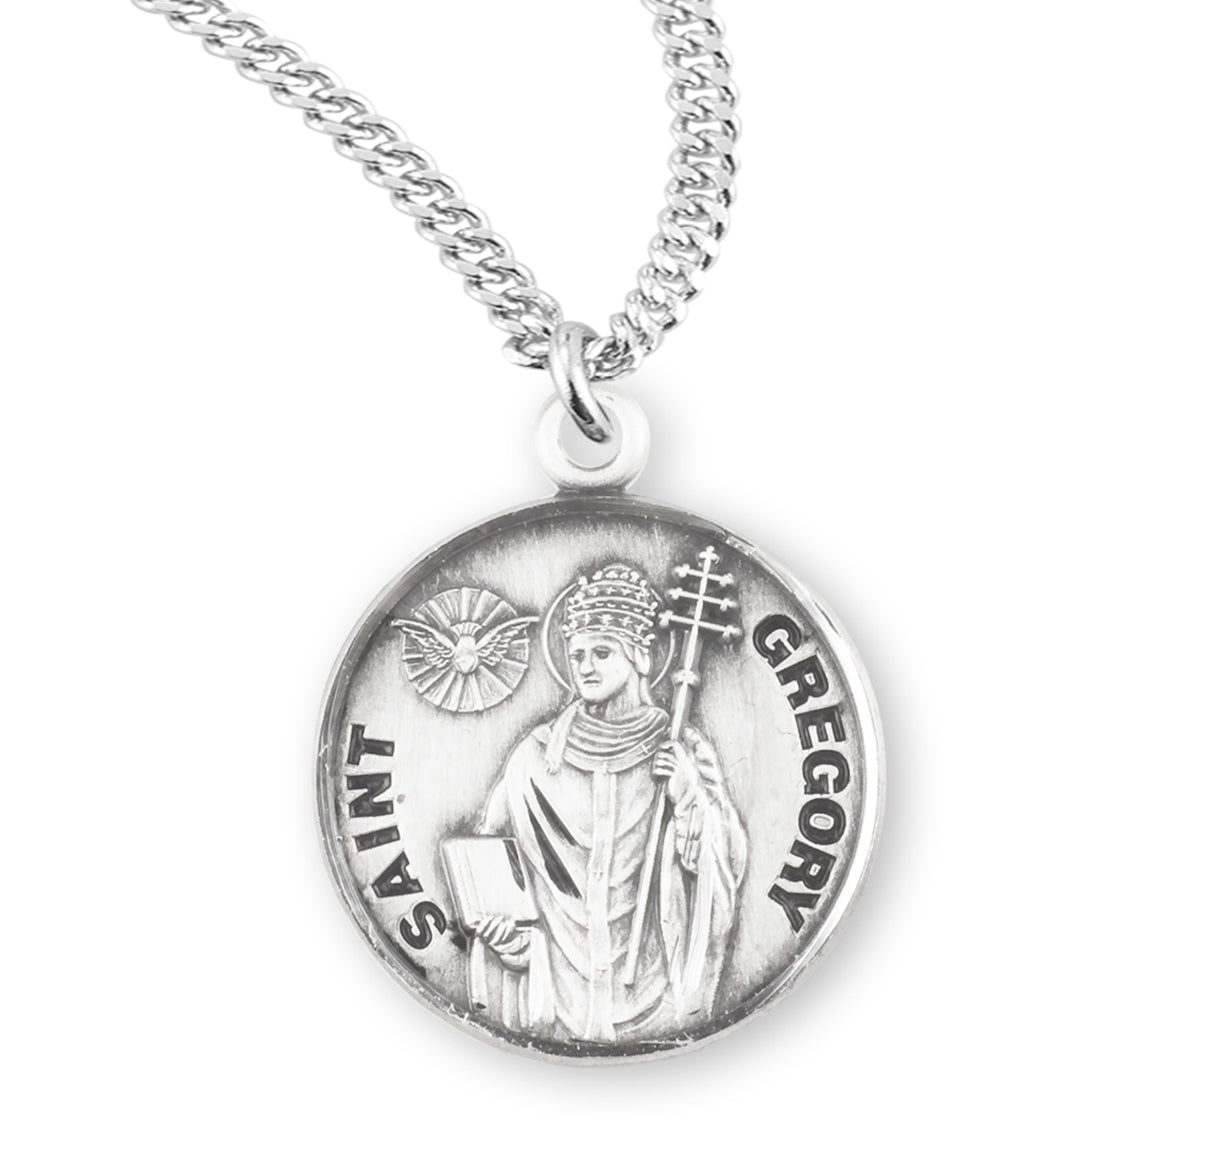 Patron Saint Gregory Round Sterling Silver Medal